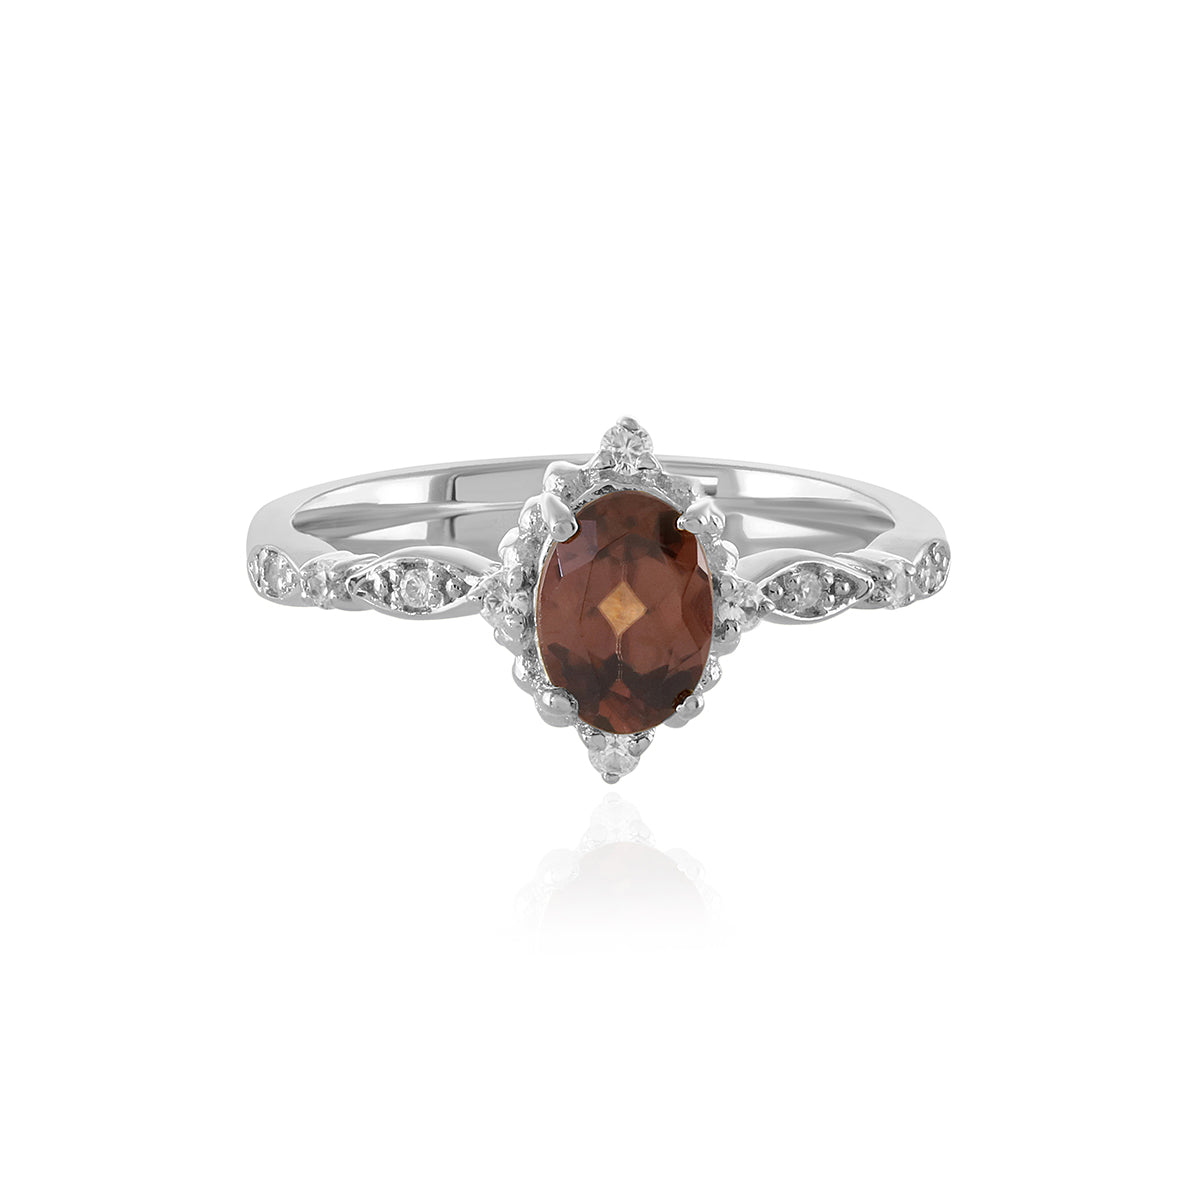 Brown Zircon with Accents Silver Ring